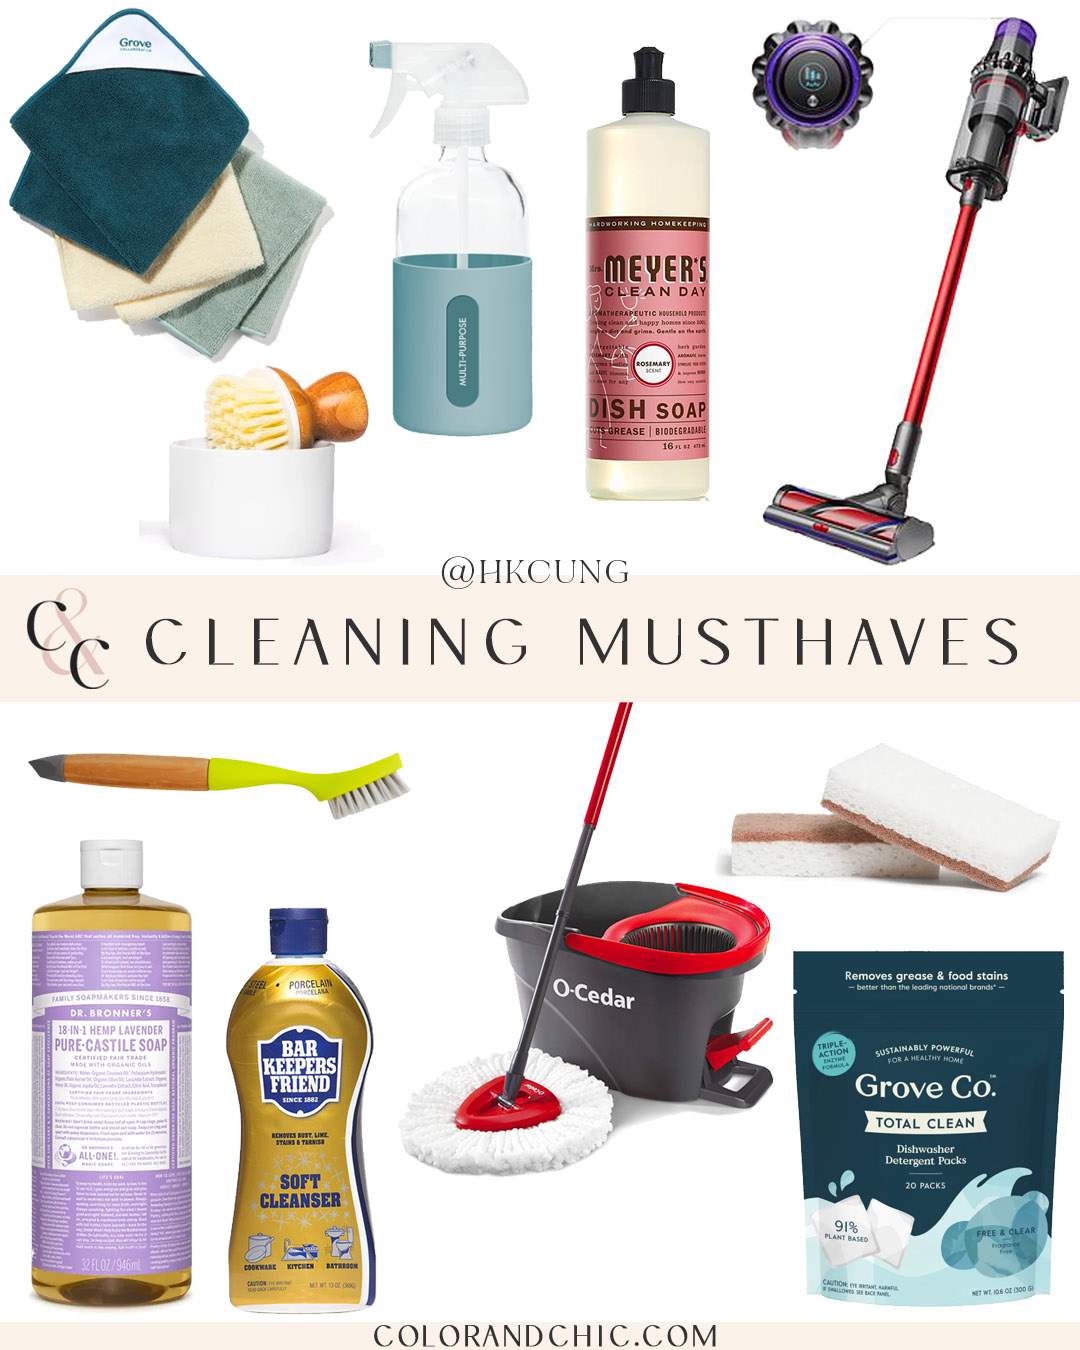 Cleaning tools for home, Cleaning supplies, Cleaning tools name